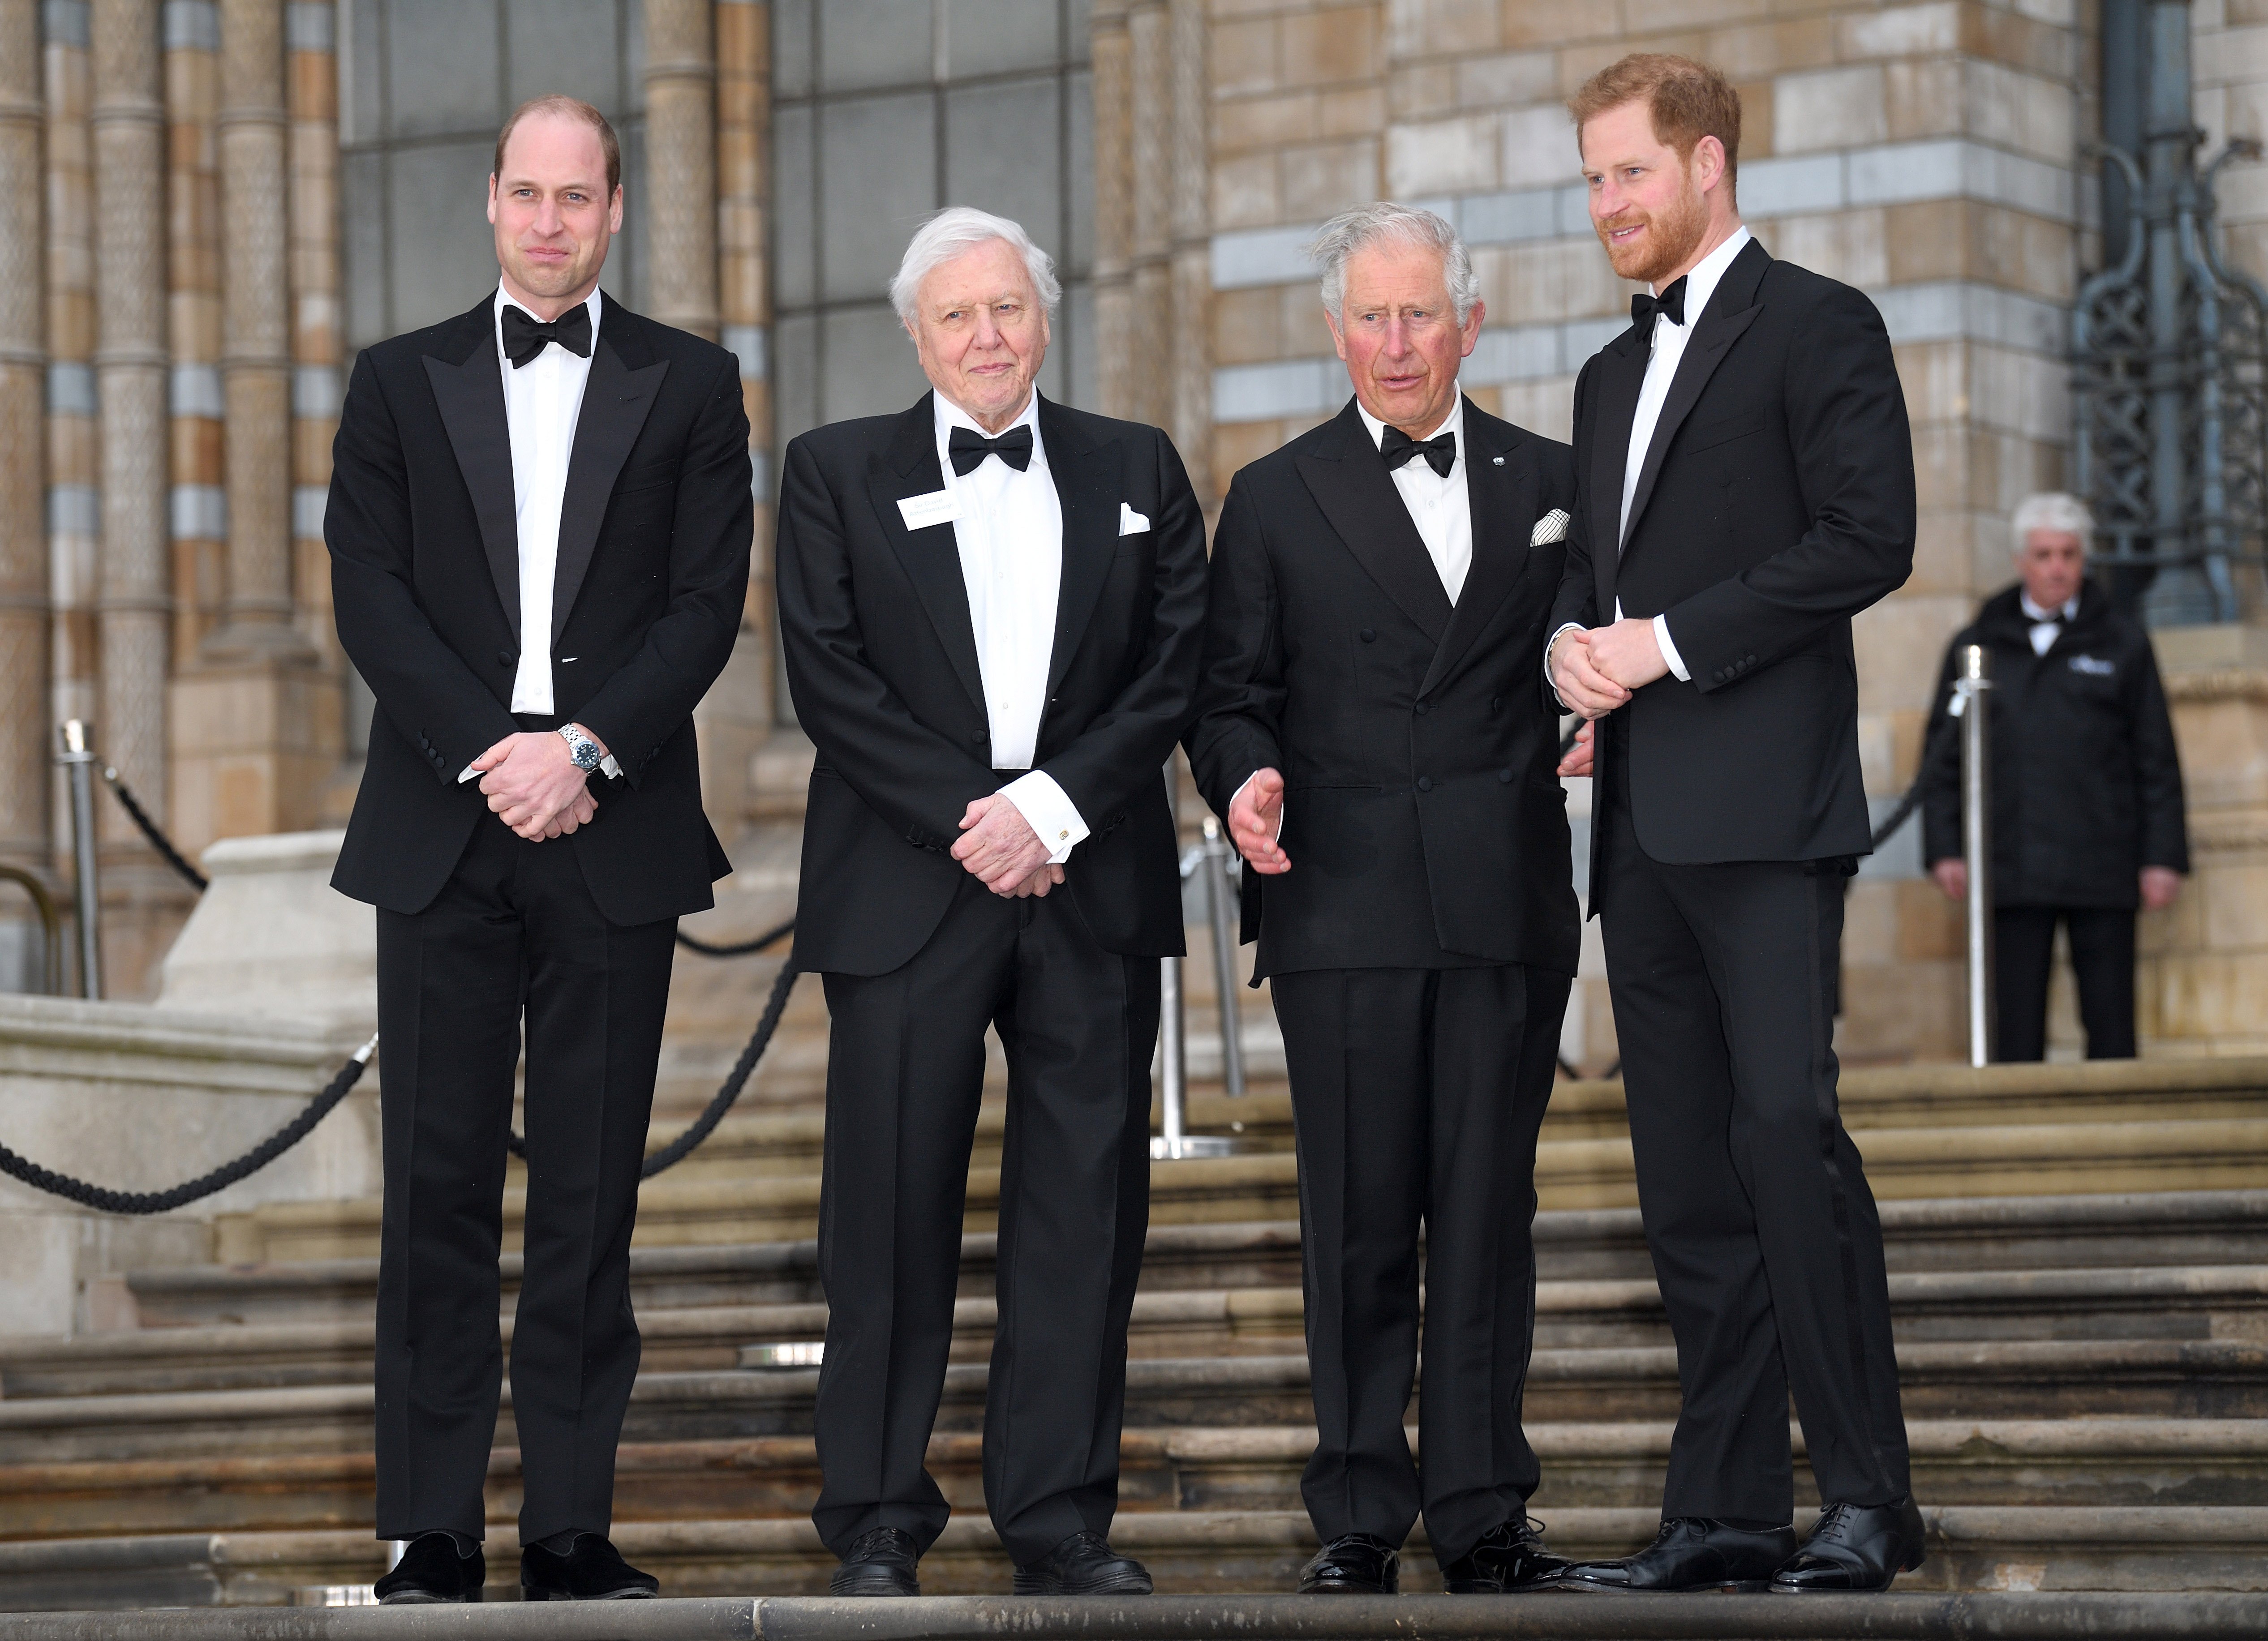 Prince William, Sir David Attenborough, Prince Charles, and Prince Harry attend the "Our Planet" global premiere at Natural History Museum on April 04, 2019 in London, England | Photo: Getty Images